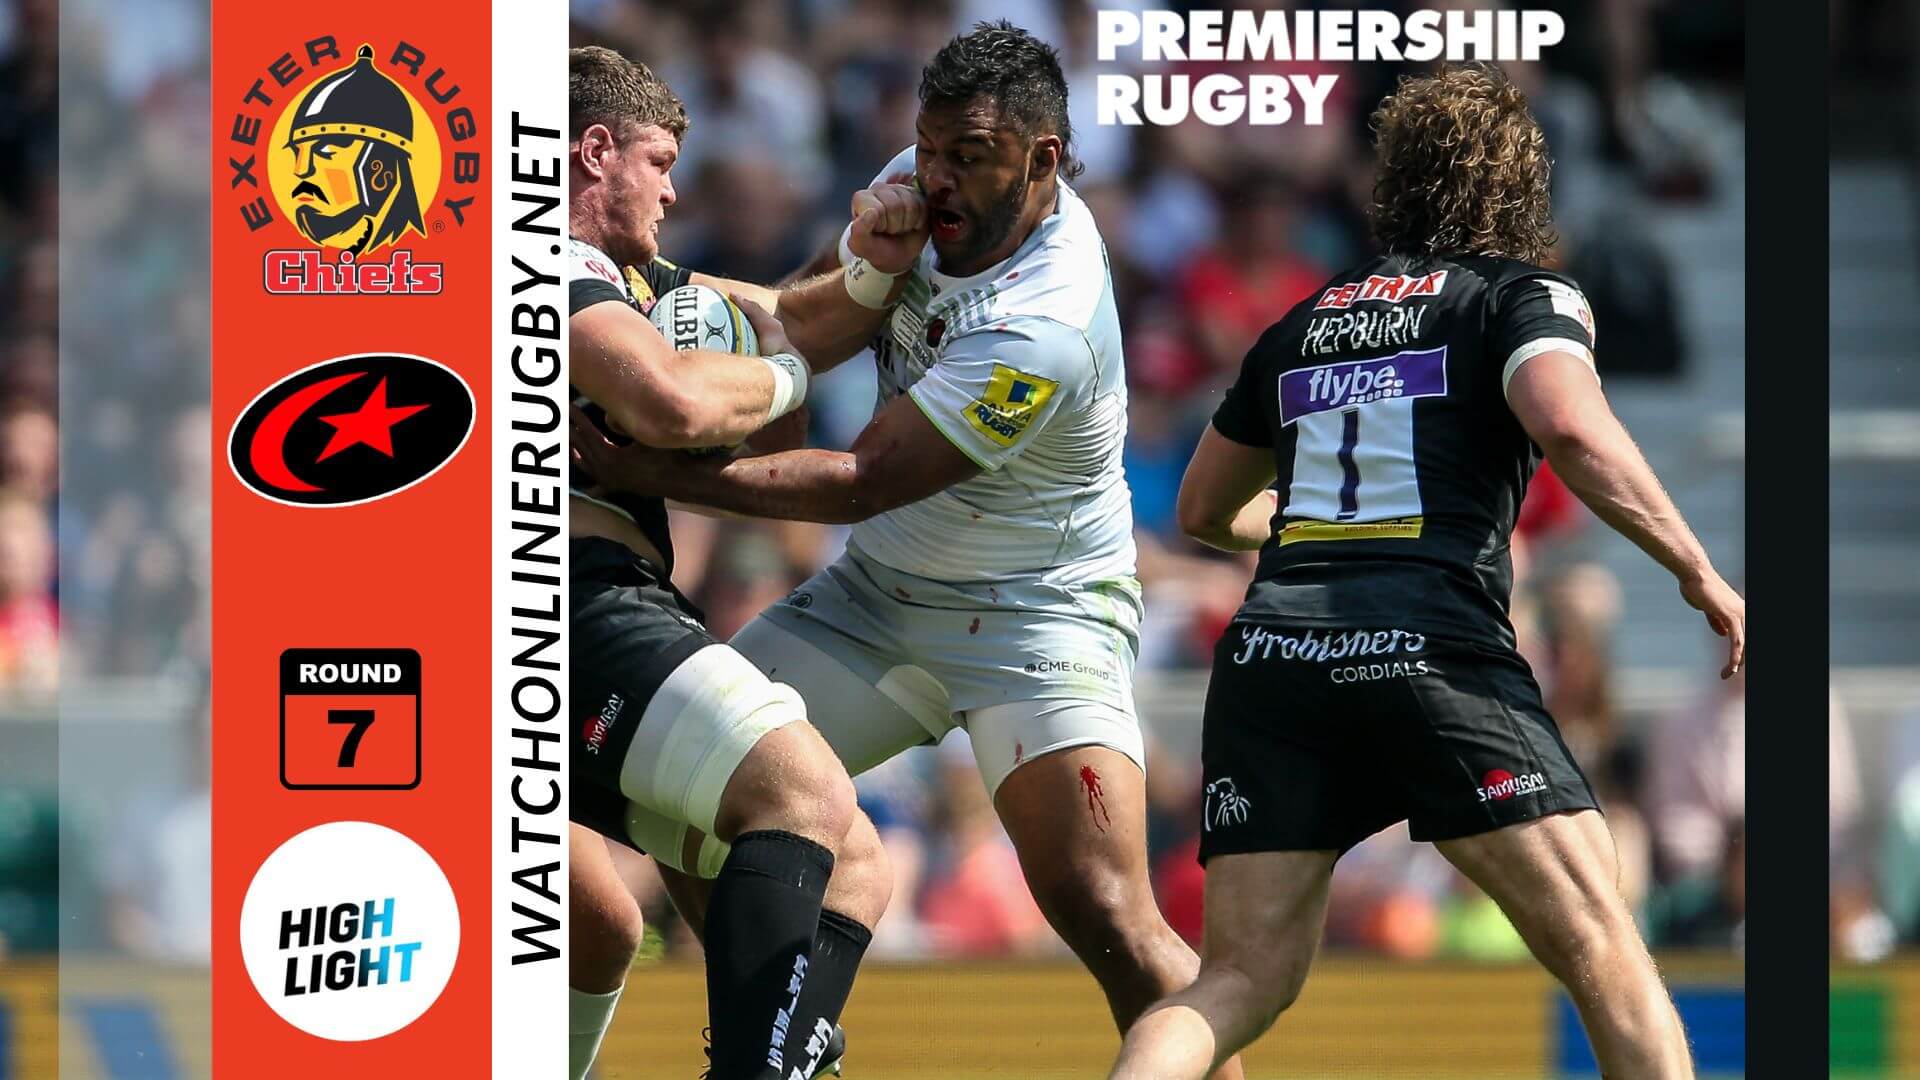 Exeter Chiefs Vs Saracens Premiership Rugby 2022 RD 7